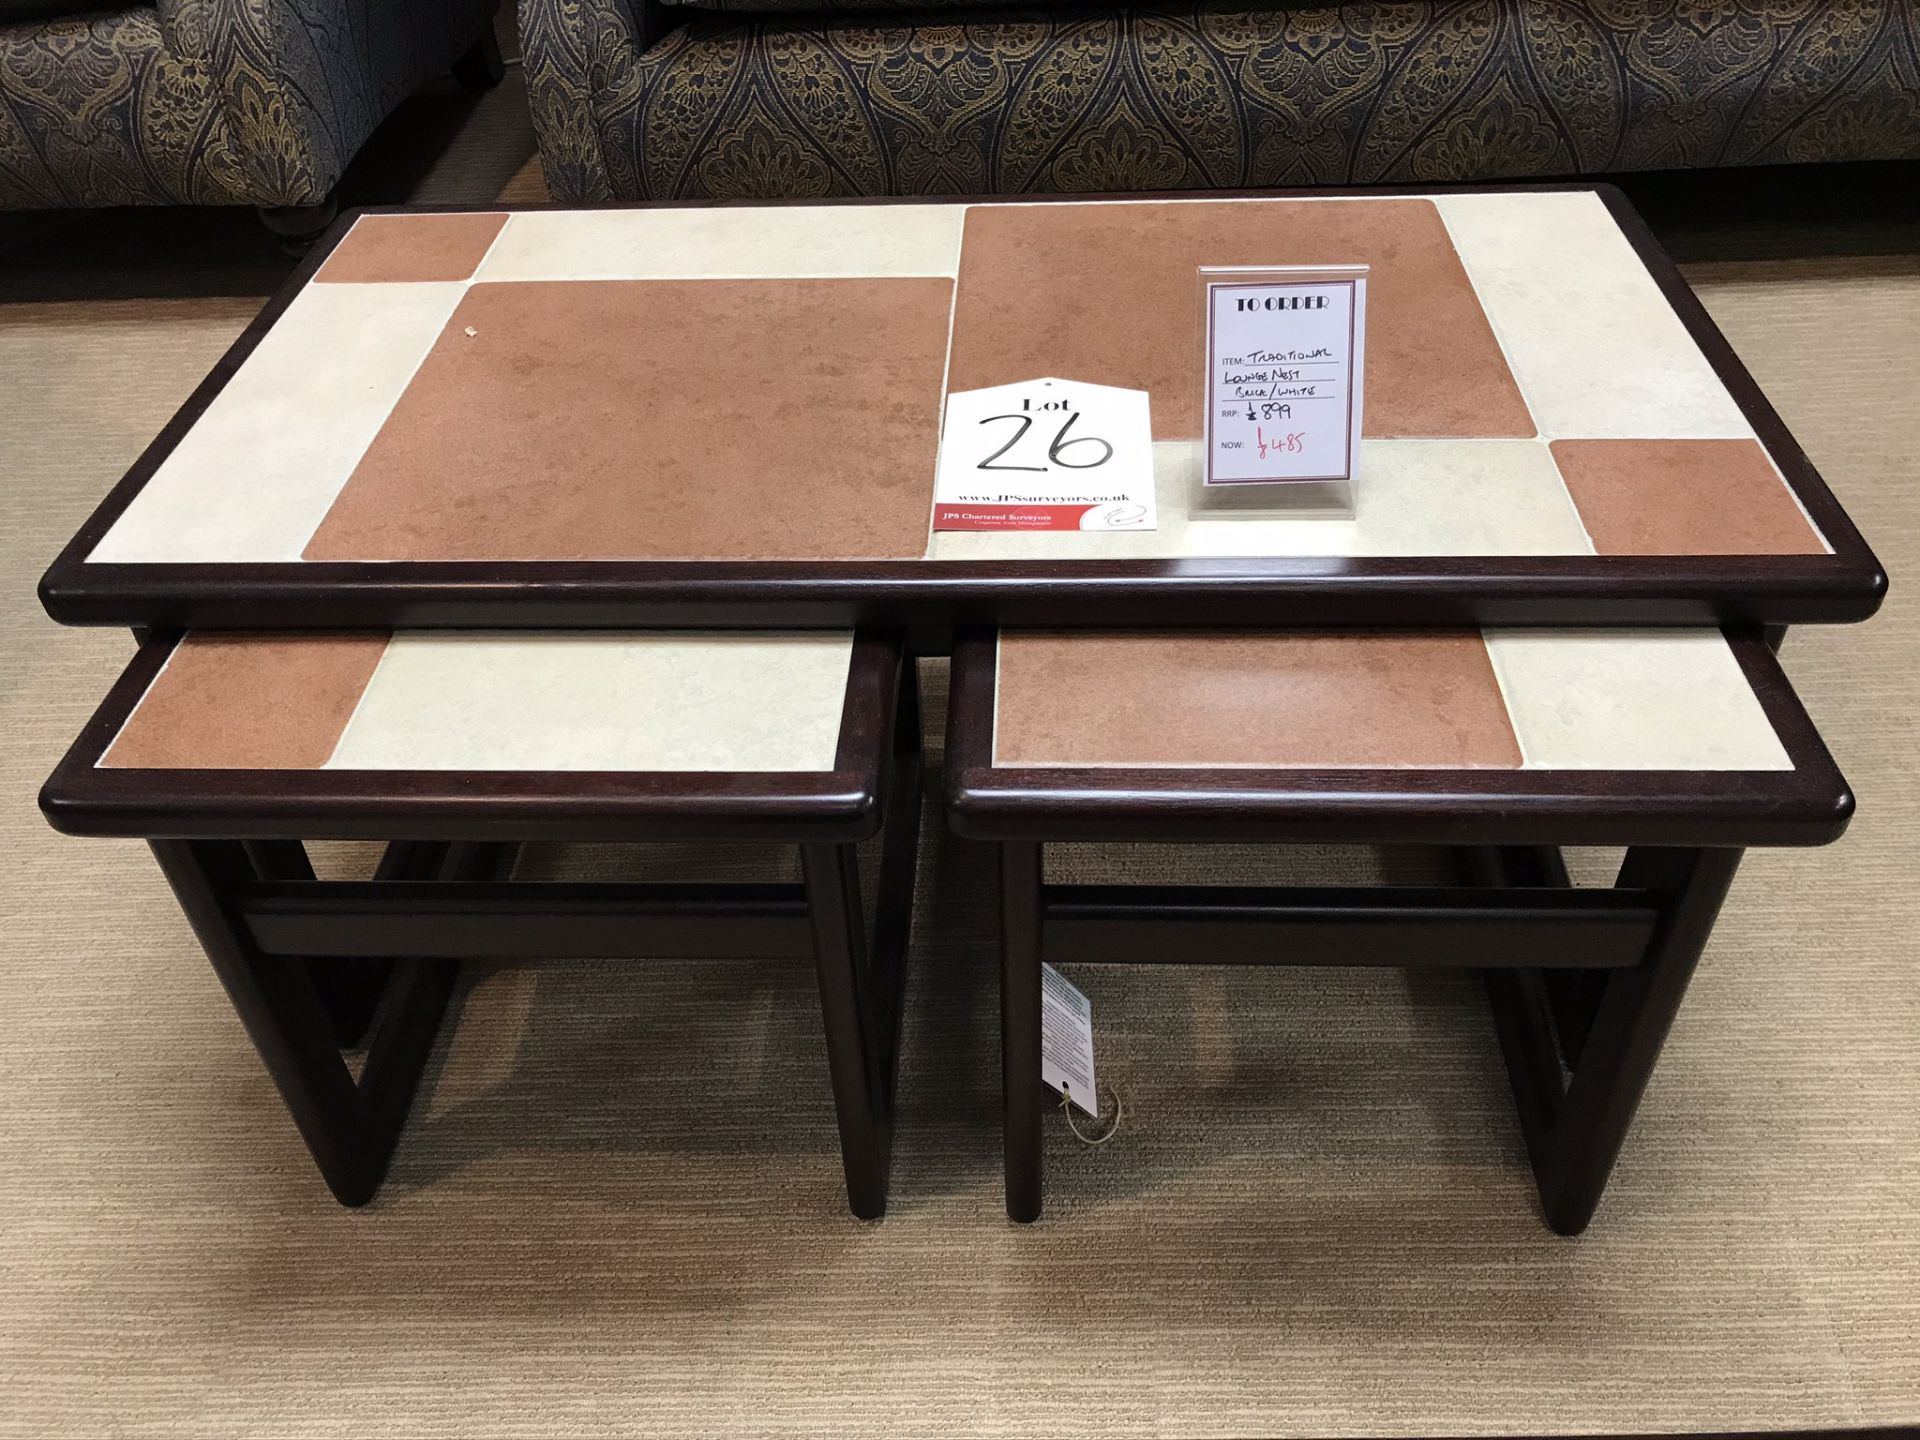 Ex Display AnBerCraft 201/ST Lounge Nest Tables - Traditional Range Brick/White Tile Top - Mahogany